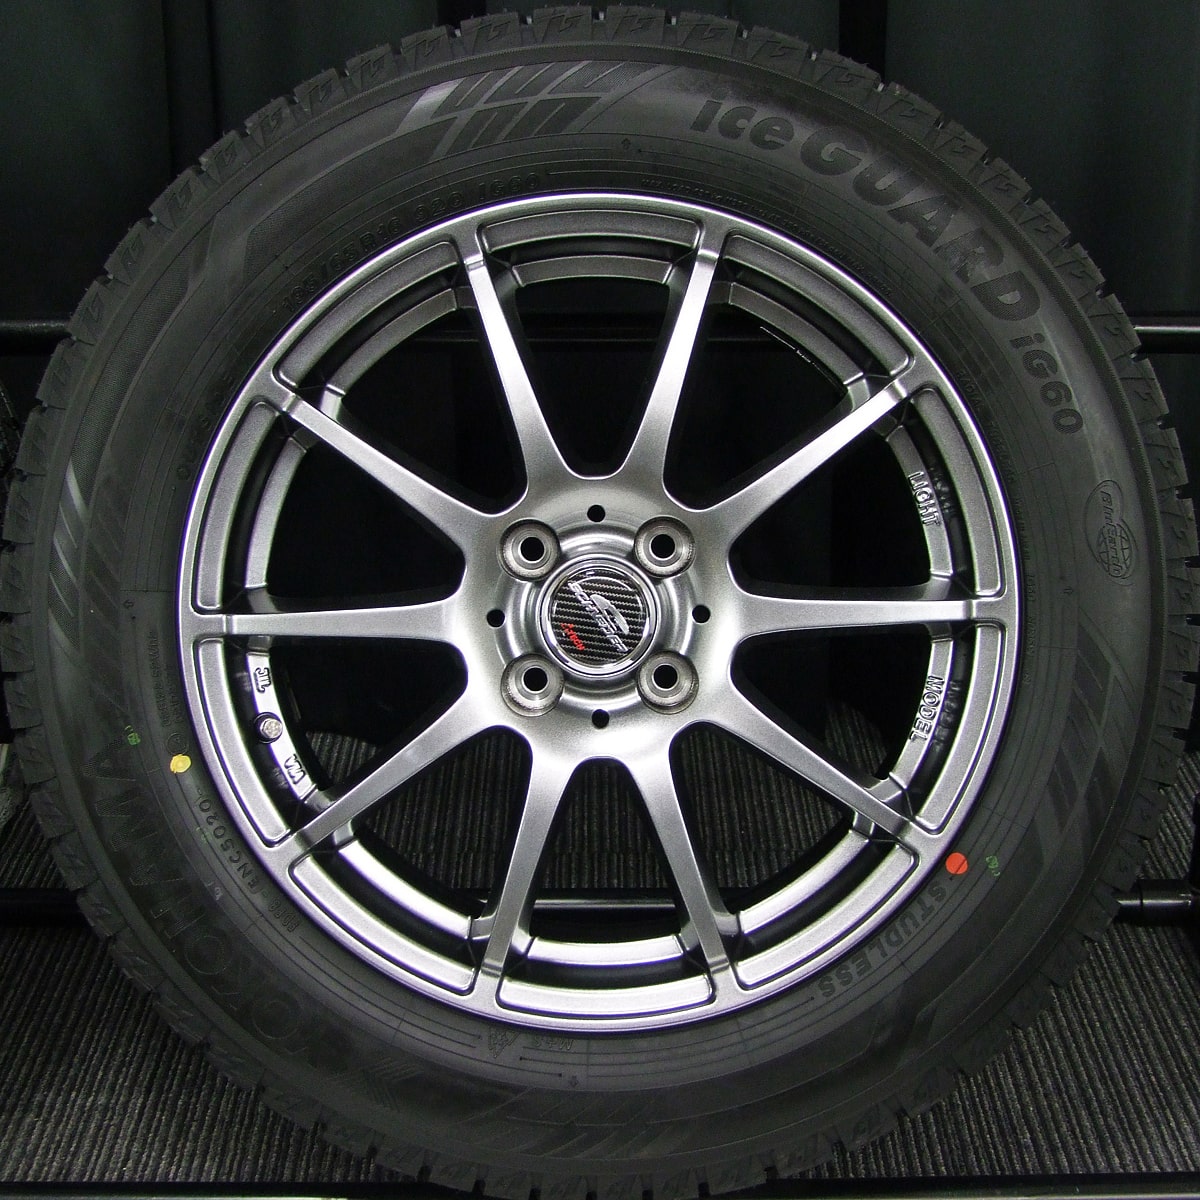 TOYO PROXES CF3 195/55R16 SCHNEIDER Stag メタリックグレー 16インチ 6.5J+48 5H-100 4本セット